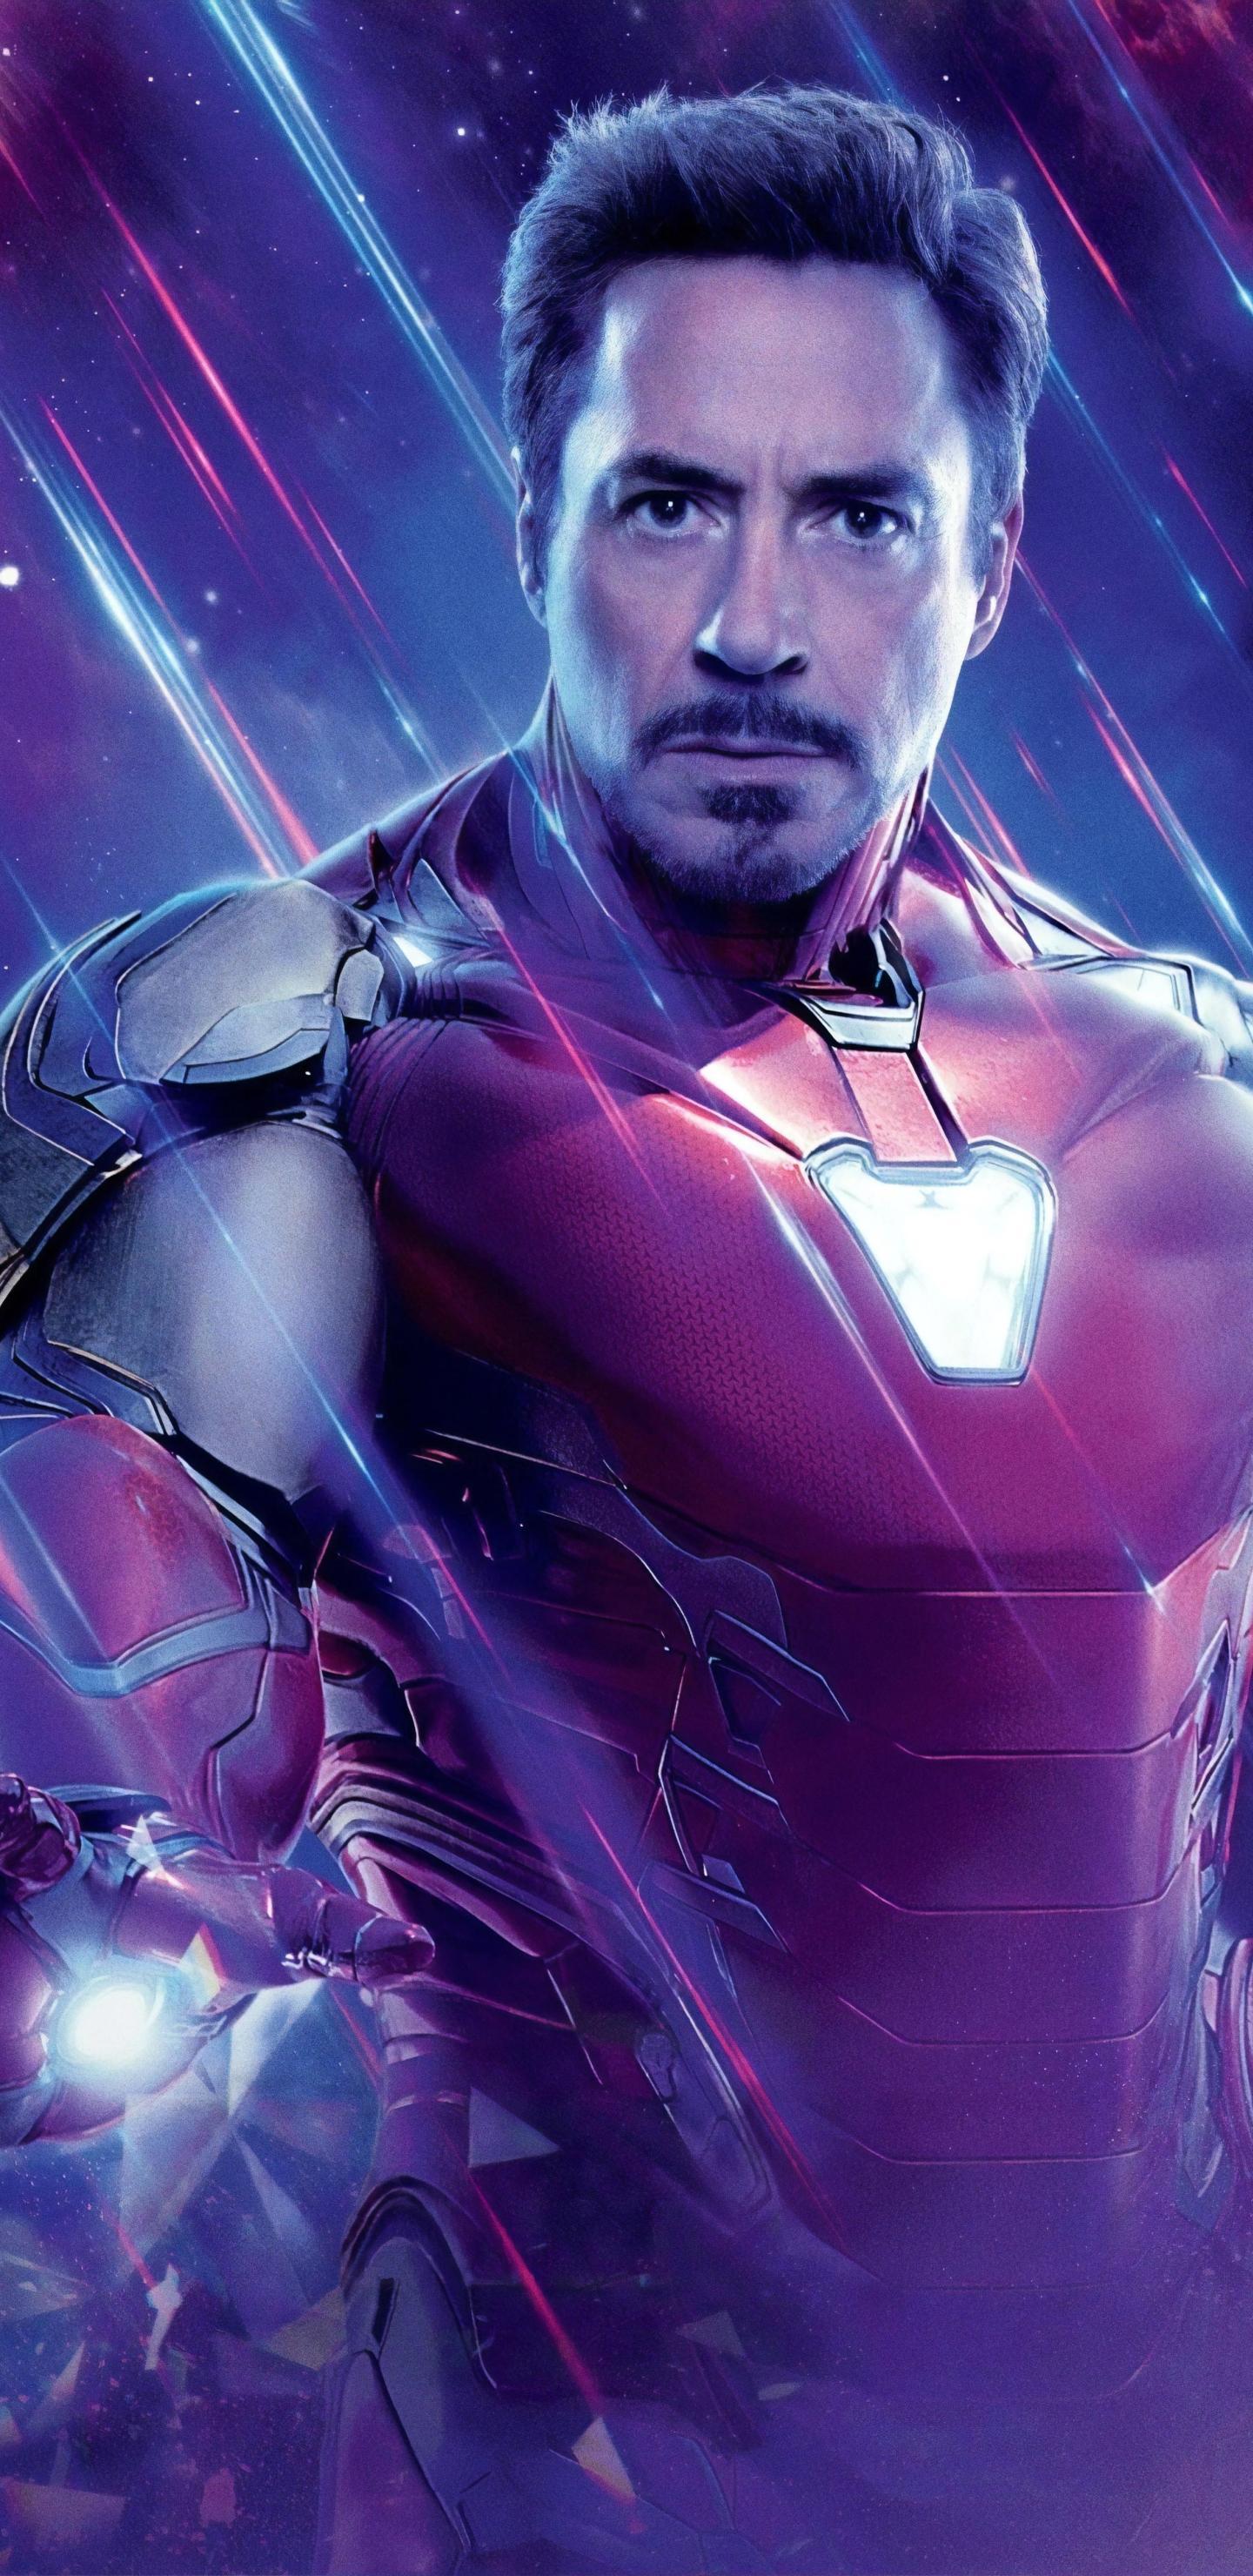 Iron Man in Avengers Endgame Samsung Galaxy Note S9